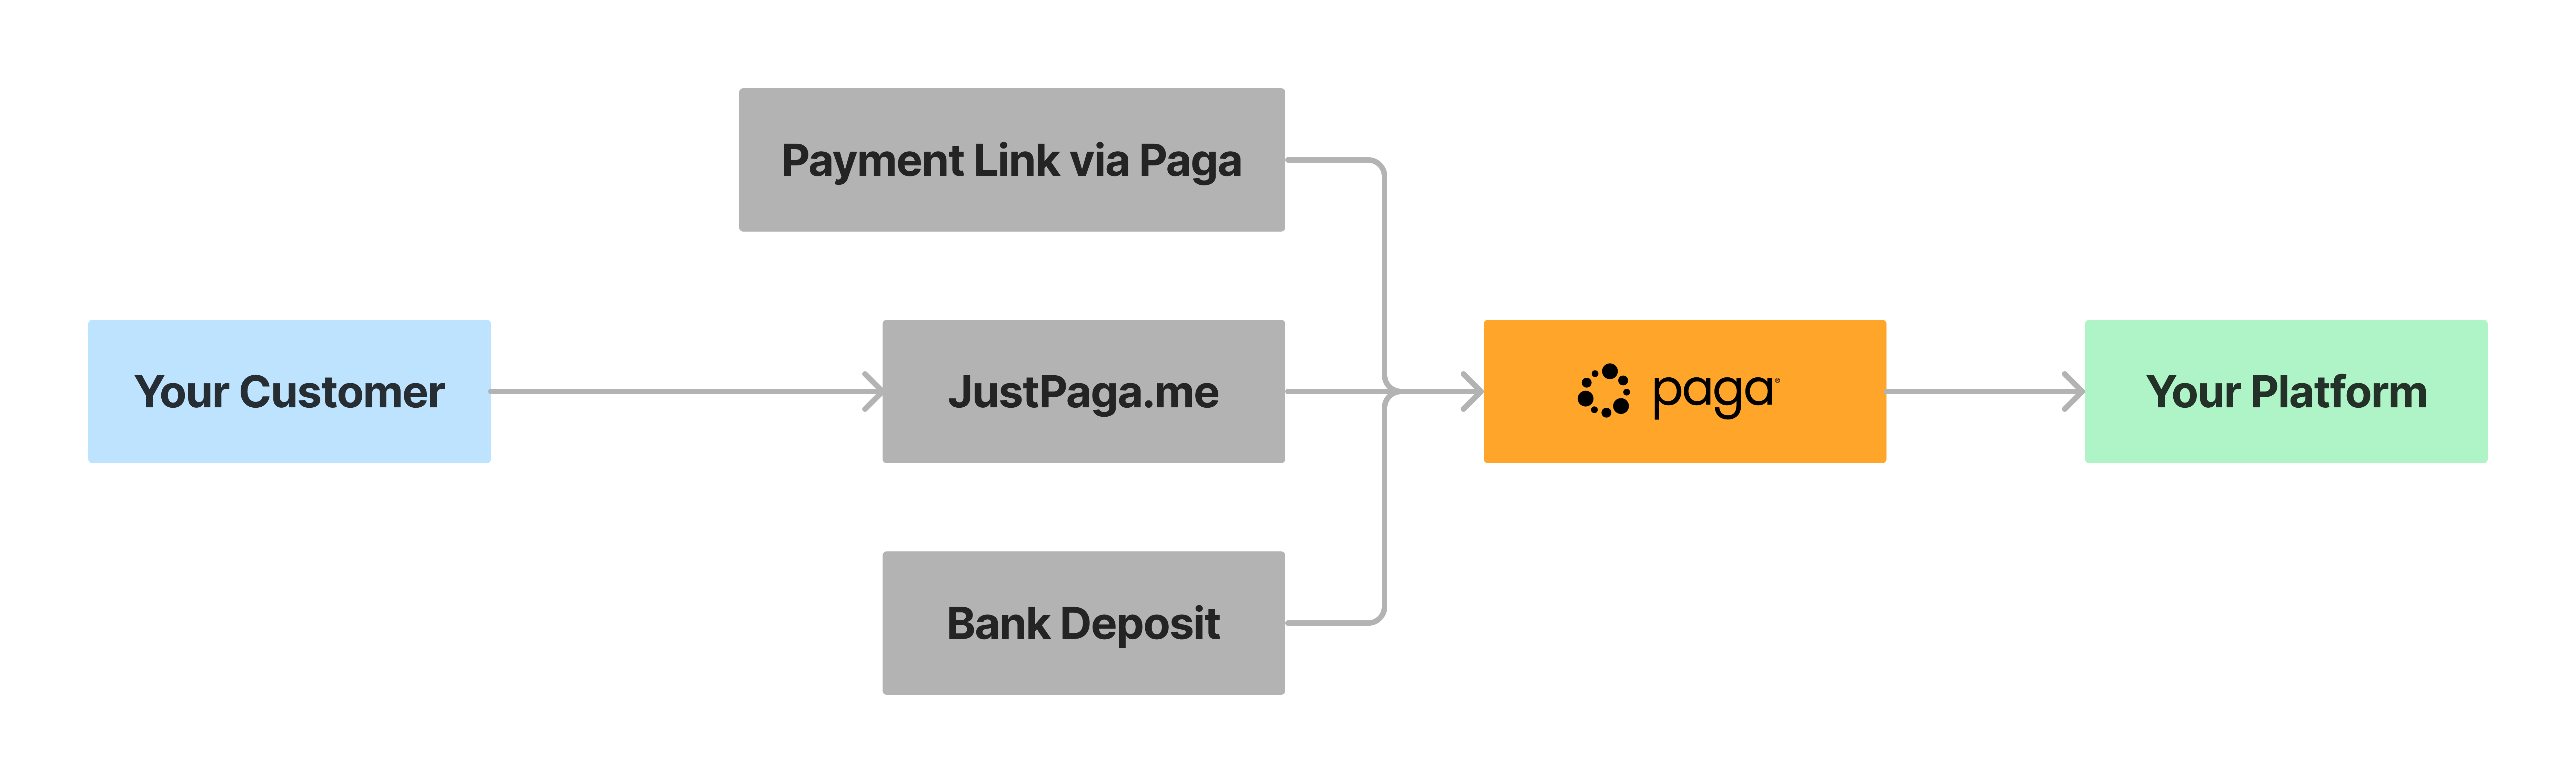 Accepting payments directly on paga.